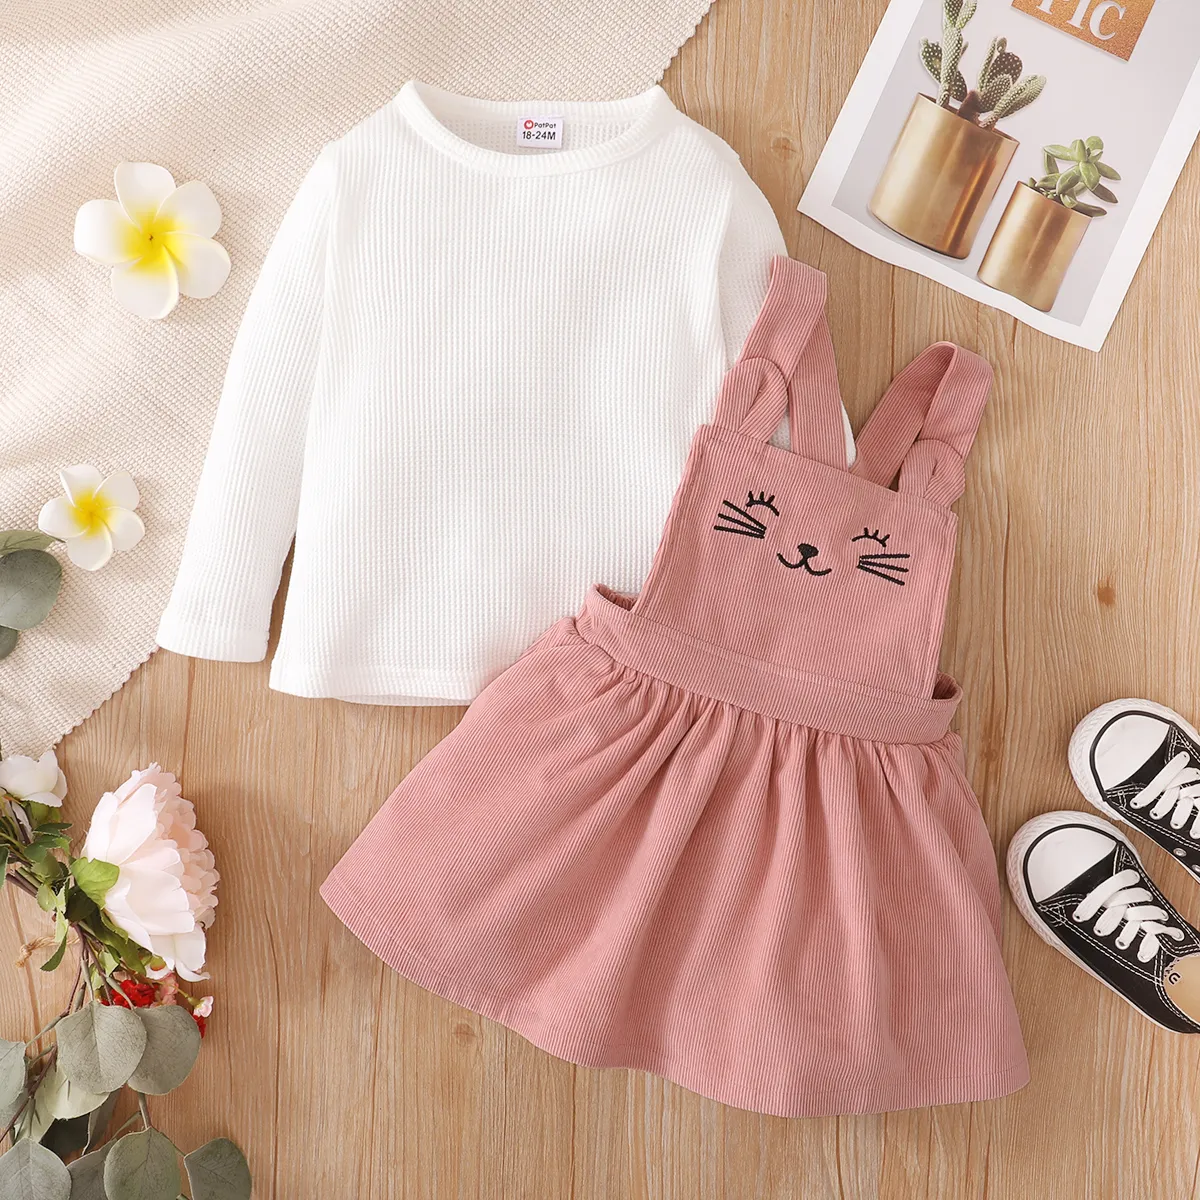 2-piece Toddler Girl Waffle White Top and Cat Embroidered Pink Overall Dress Set Pink big image 1